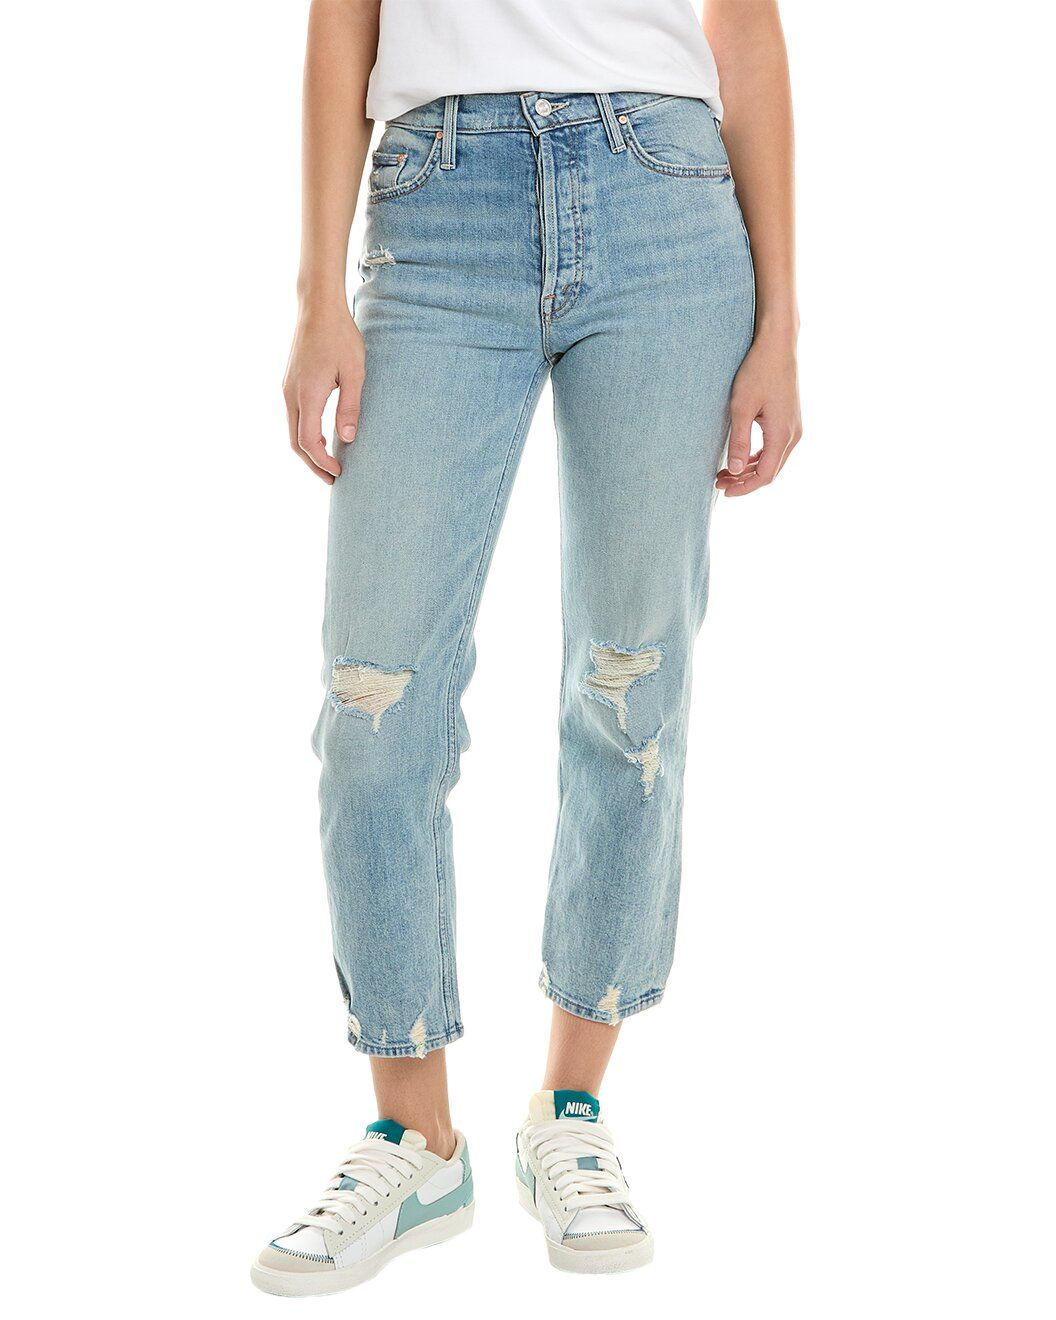 Denim The Tomcat The Confession Relaxed Jean | Gilt & Gilt City